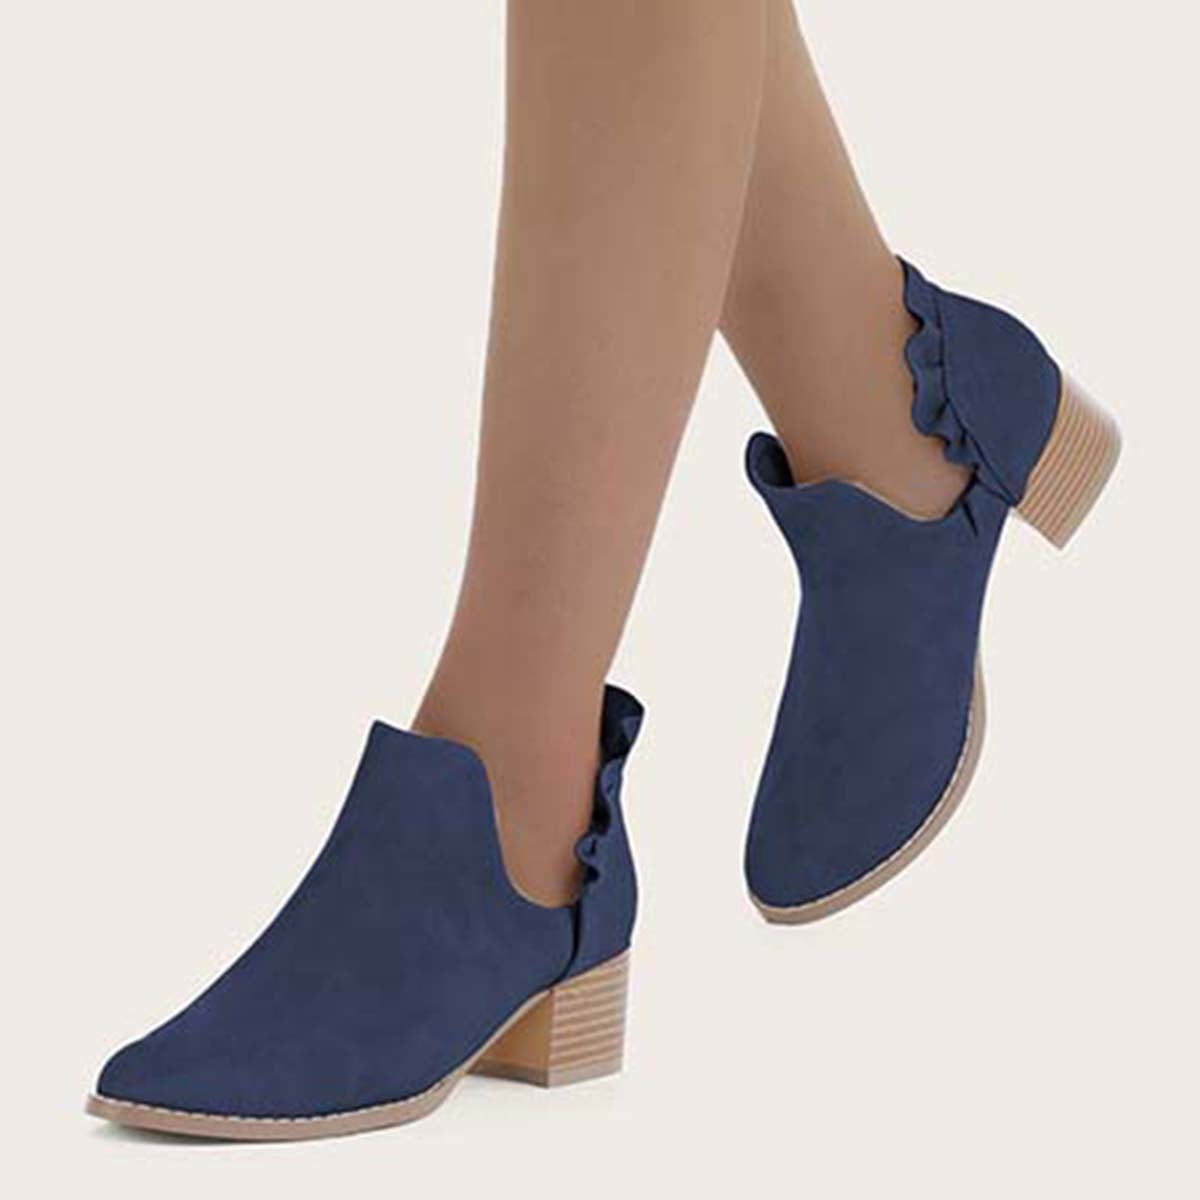 Cosylands Ruffle Cutout Ankle Boots Slip on Chunky Stacked Heel Booties